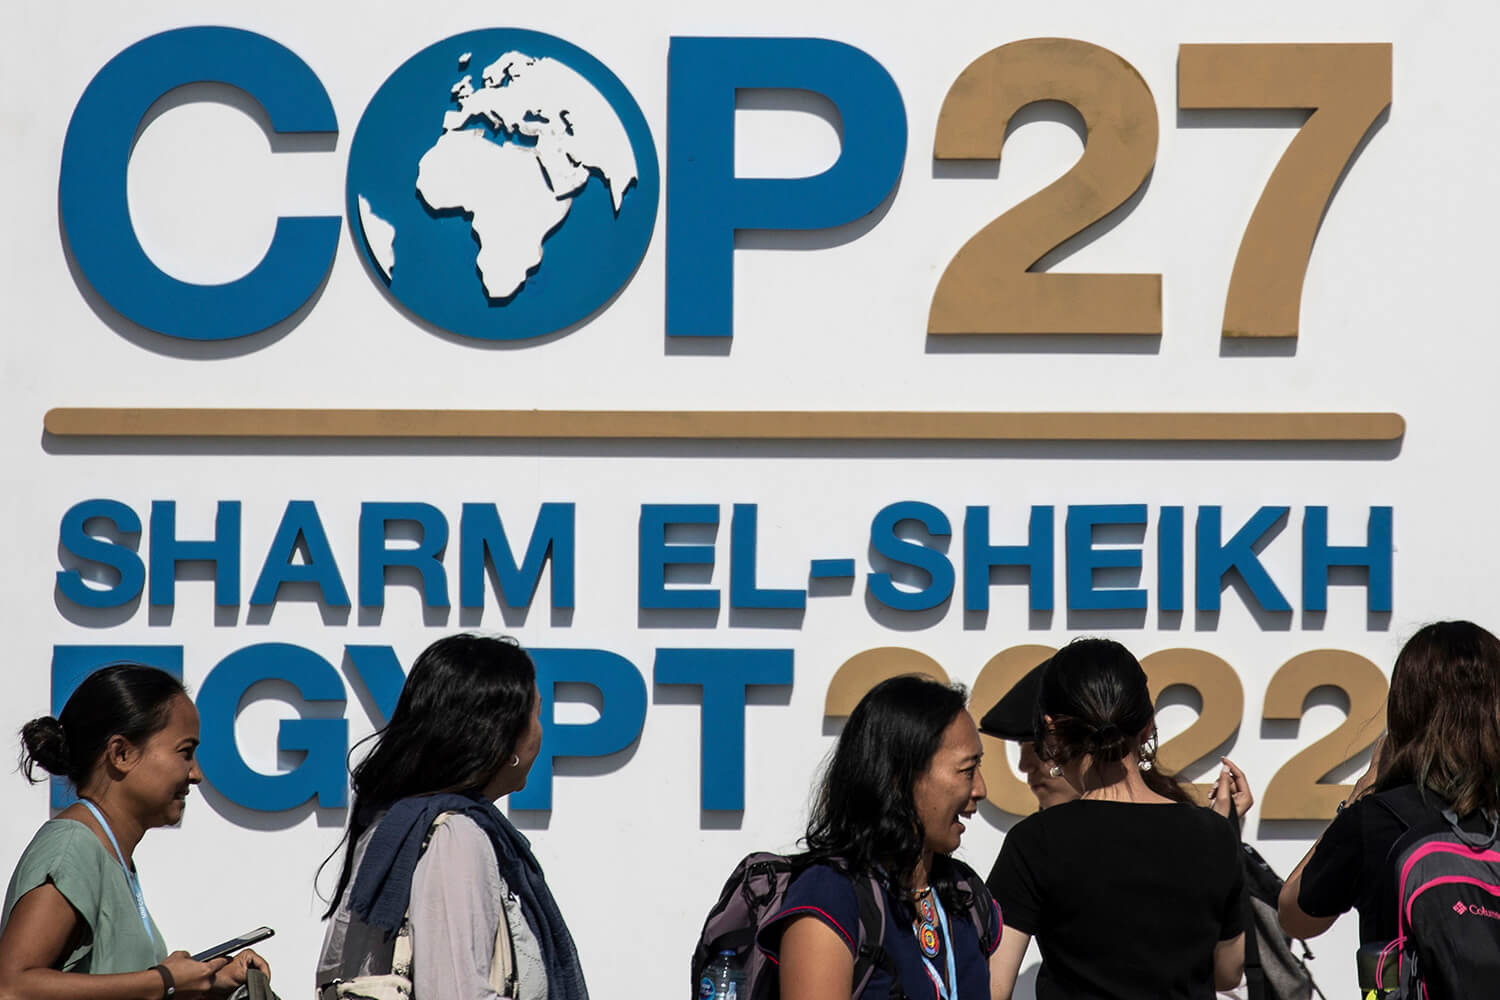 Photo of COP27 logo in Egypt